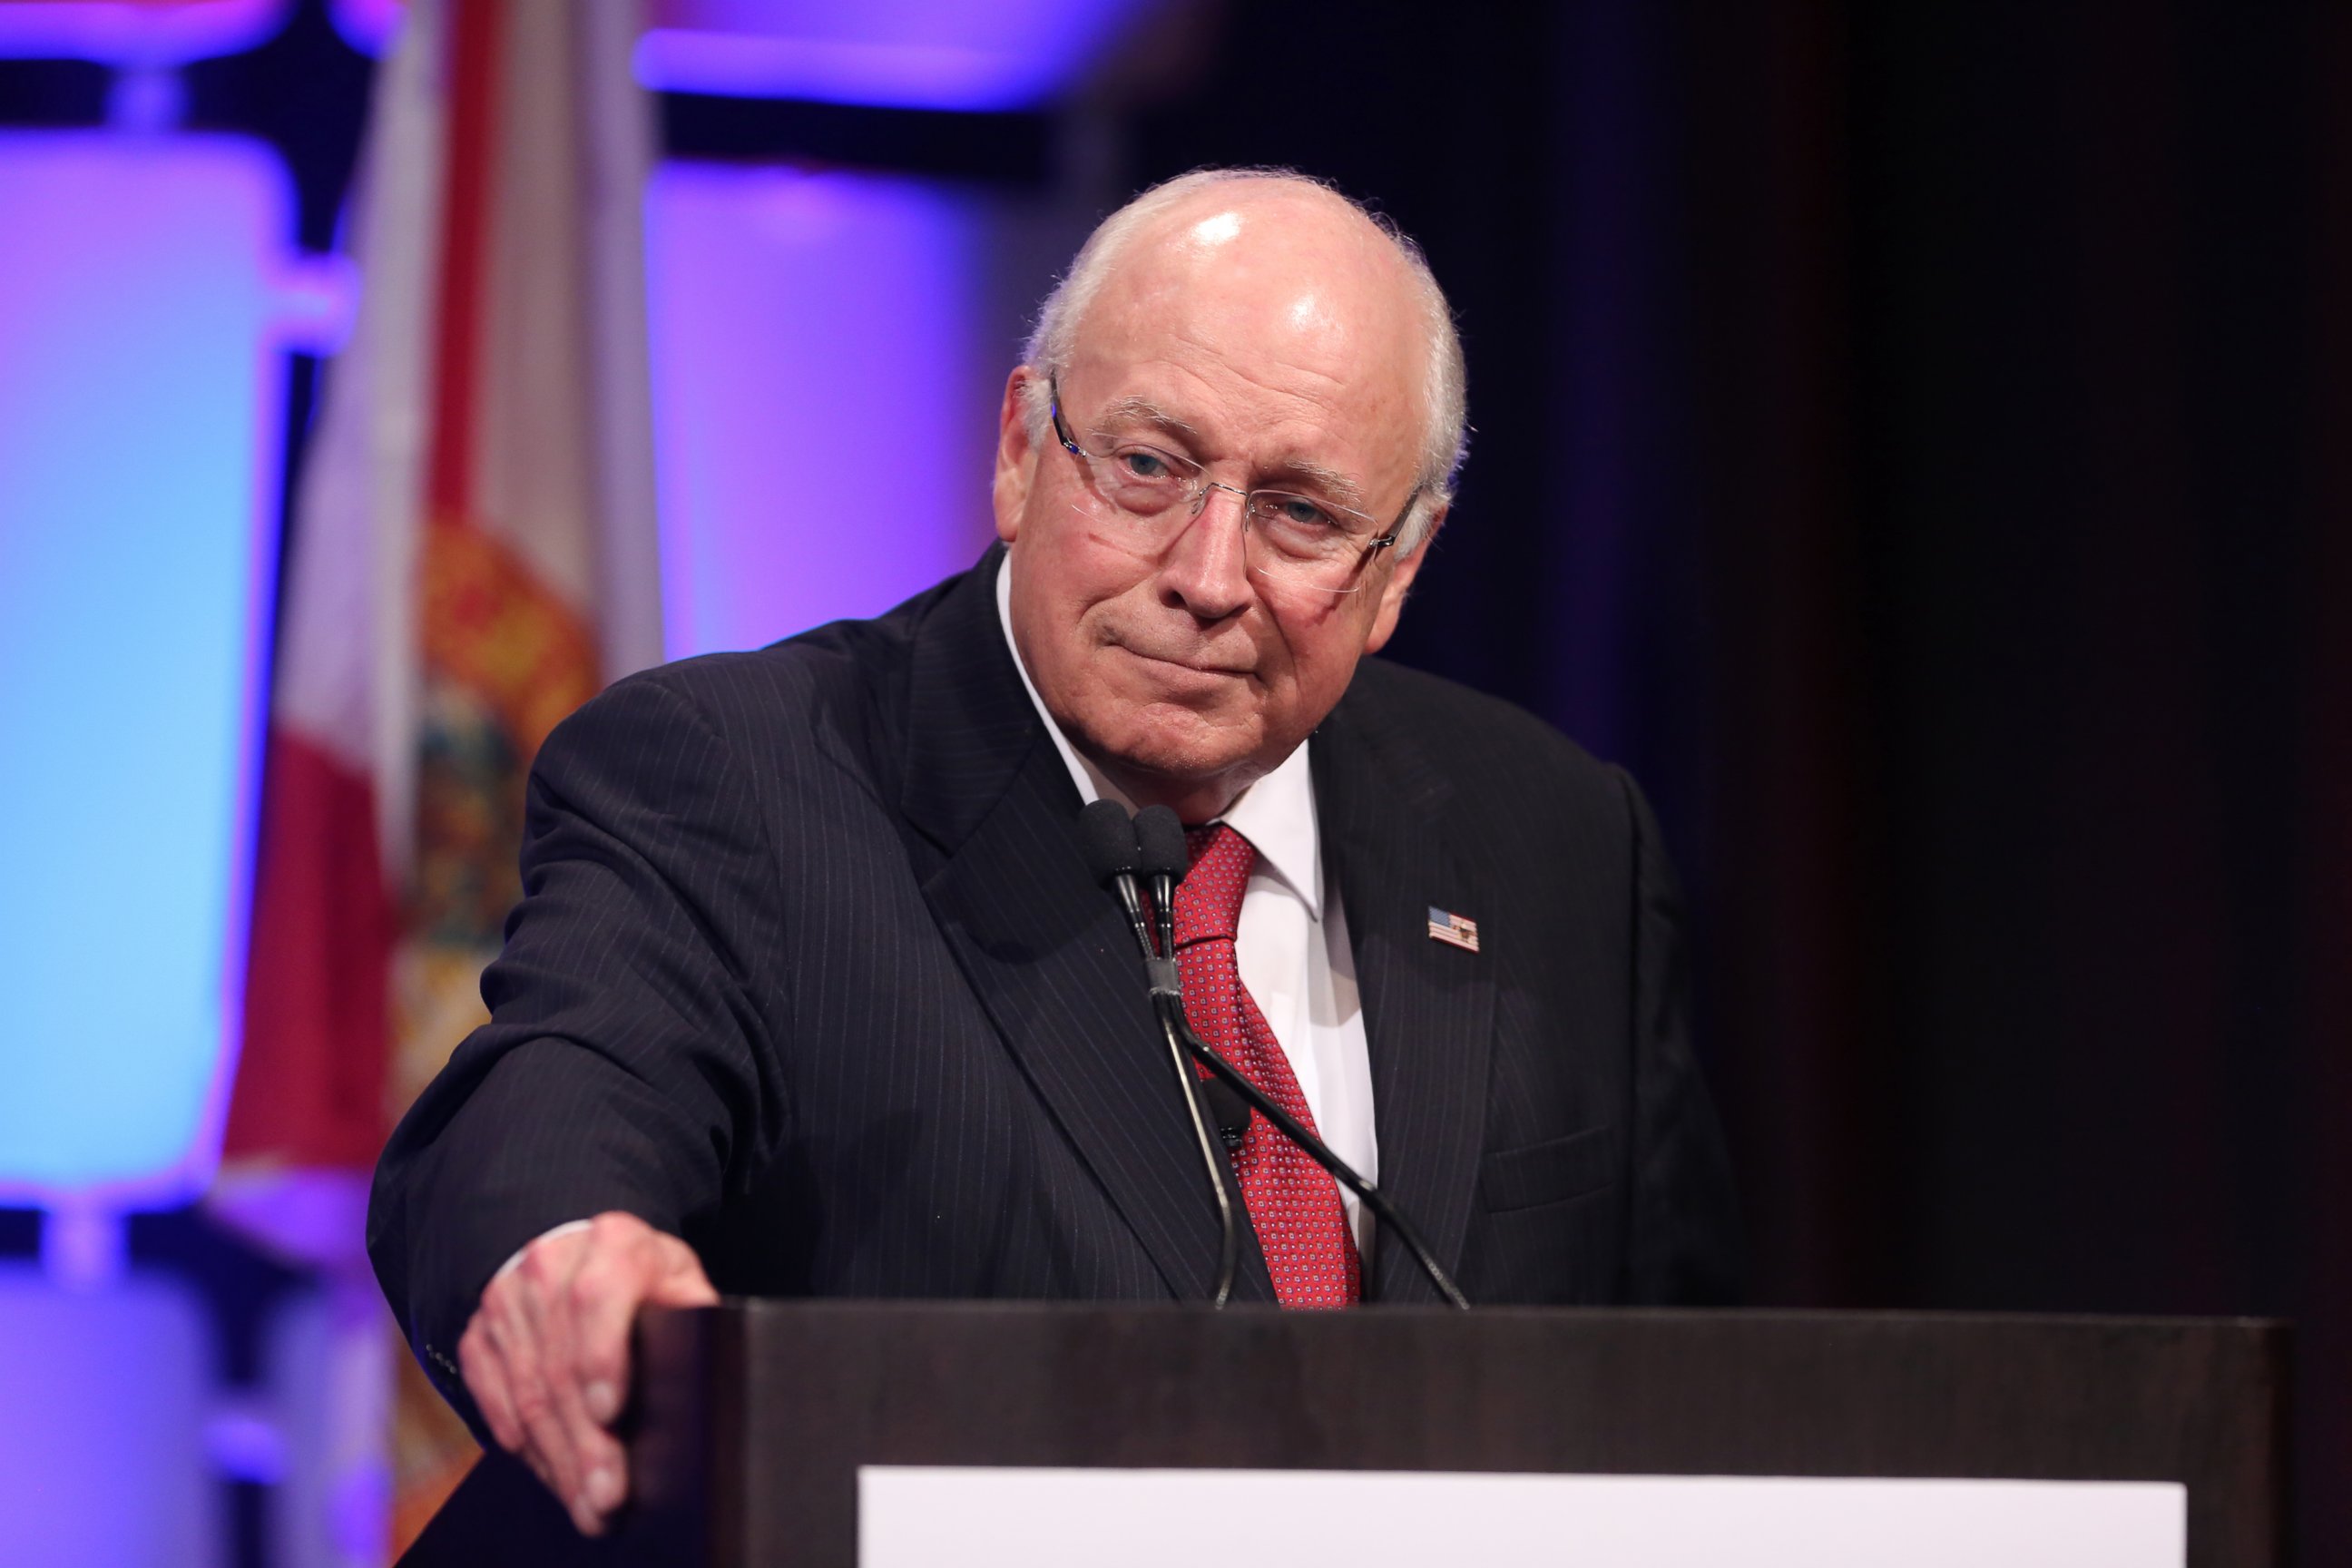 PHOTO: Former Vice President Dick Cheney speaks at the Sunshine Summit opening dinner at Disney's Contemporary Resort, Nov. 12, 2015 in Orlando, Florida.